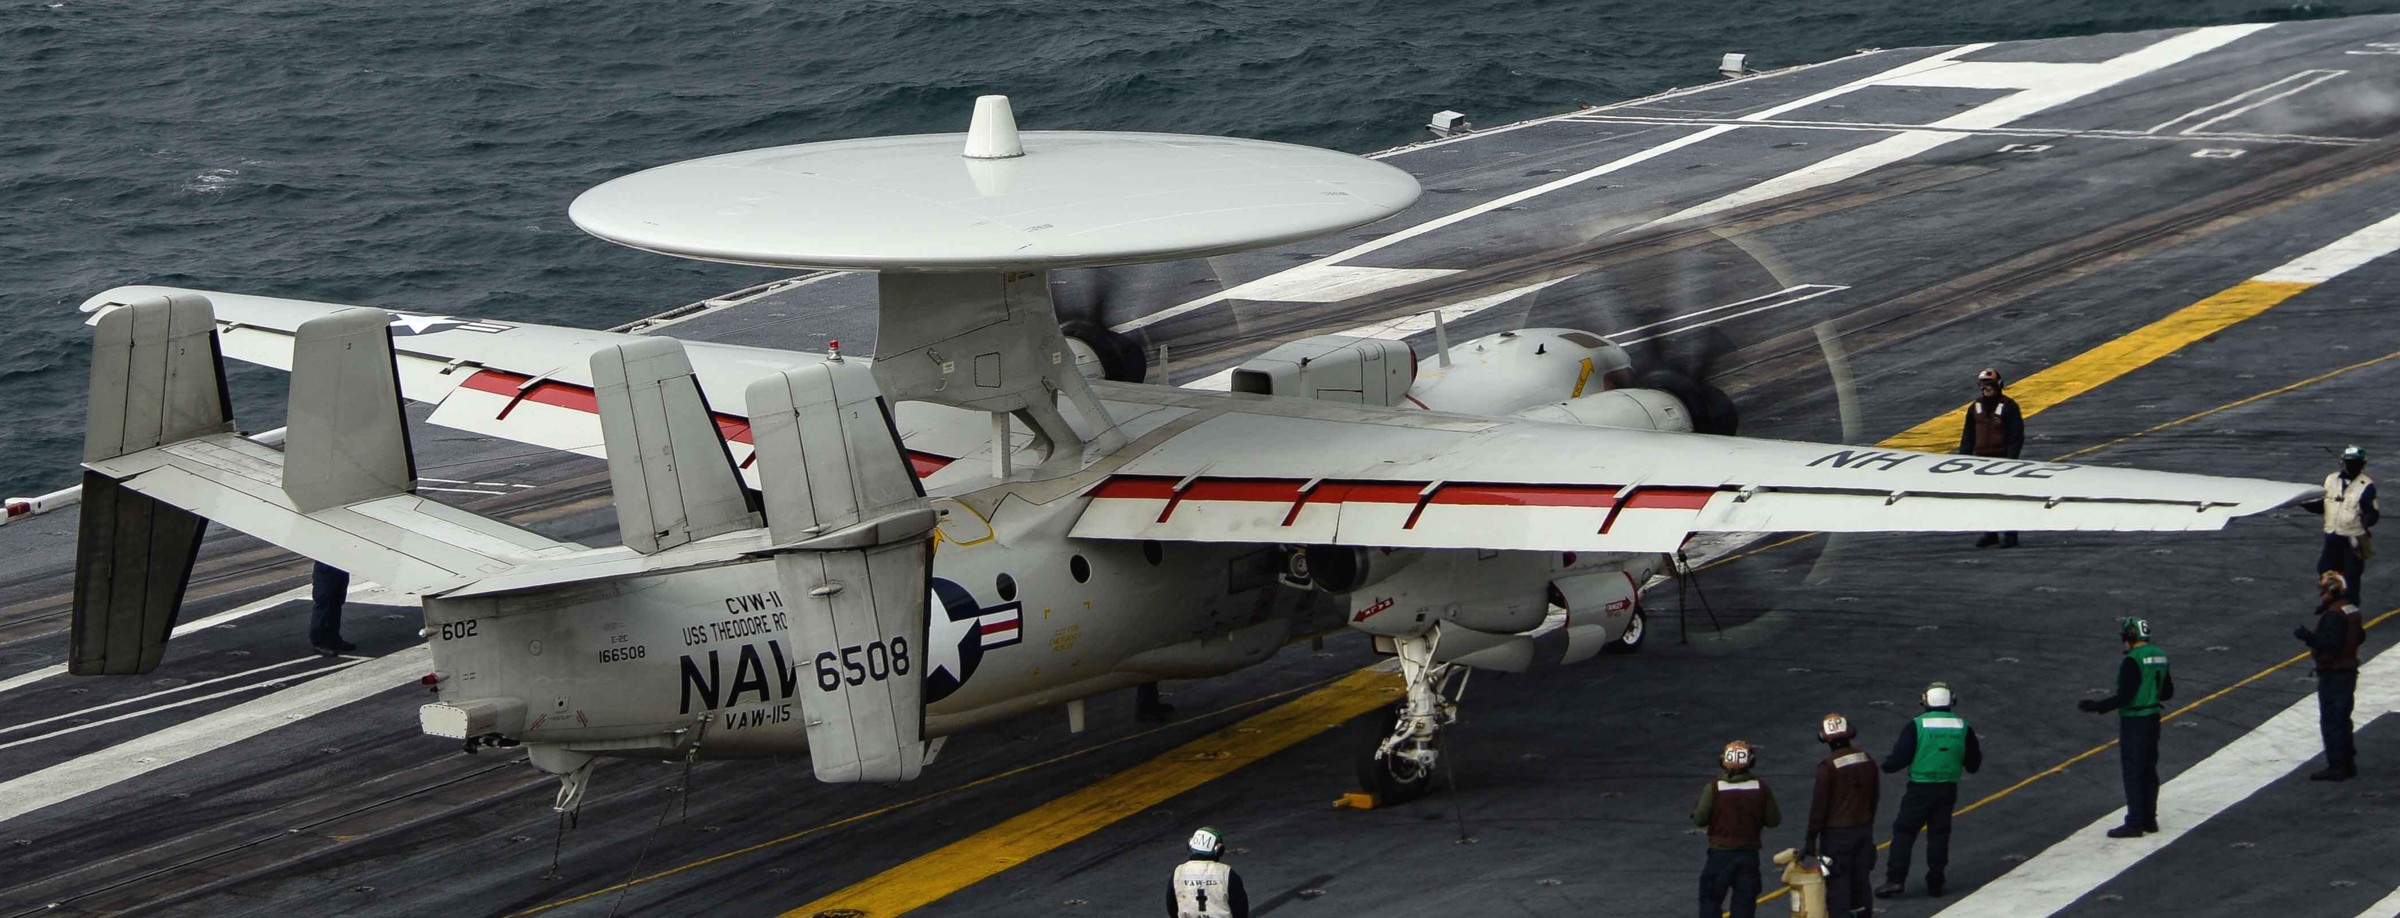 vaw-115 liberty bells airborne command and control squadron us navy grumman e-2c hawkeye cvw-11 uss theodore roosevelt cvn-71 exercise northern edge 126